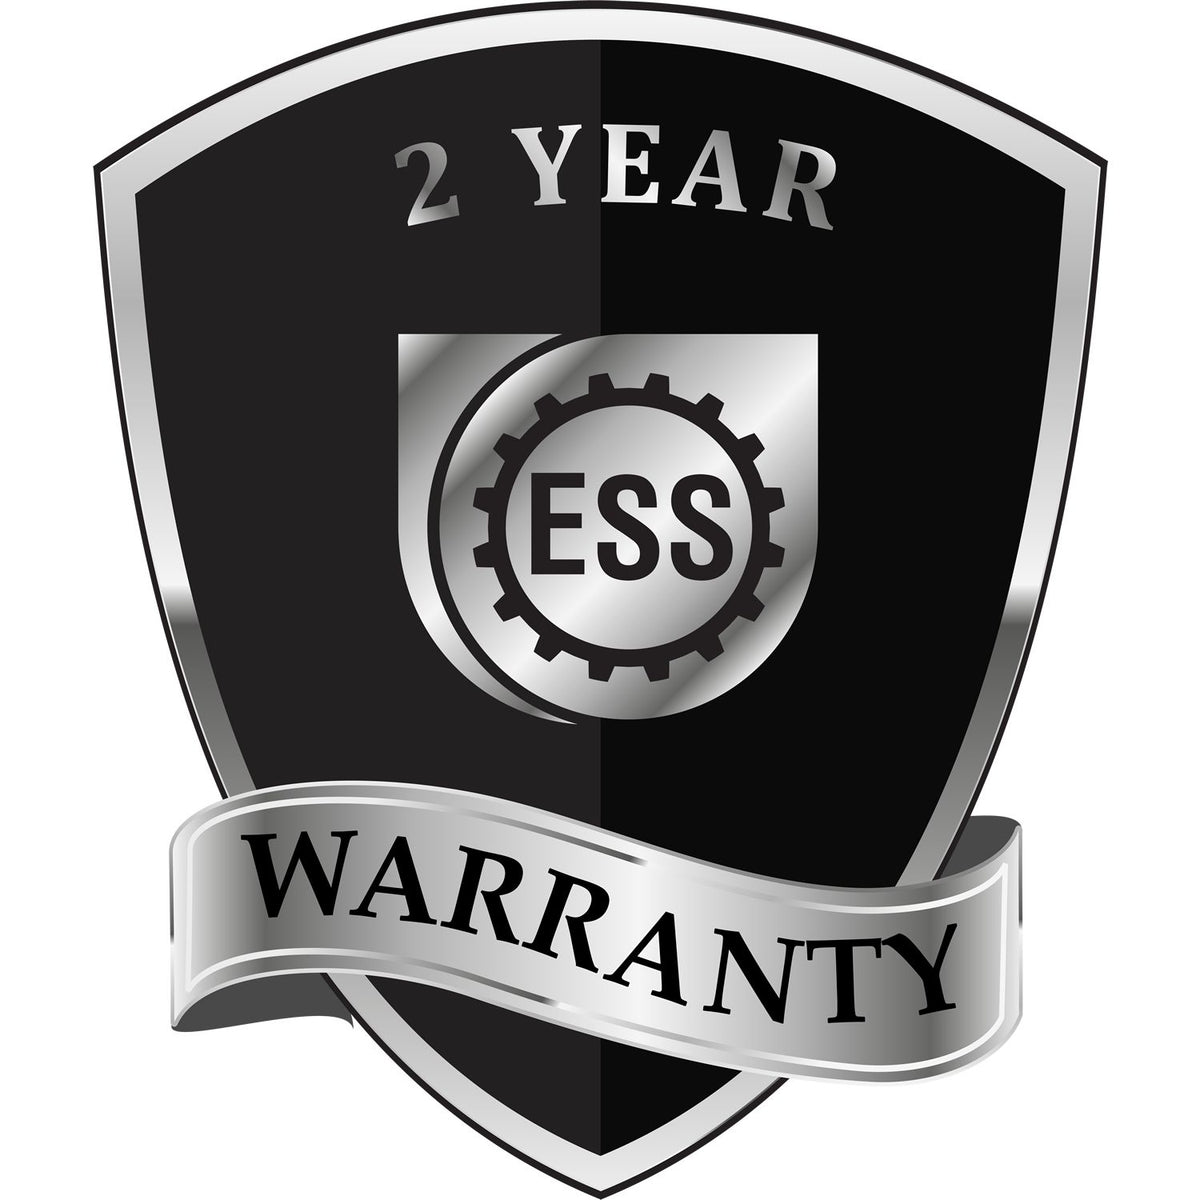 A black and silver badge or emblem showing warranty information for the Gift District of Columbia Land Surveyor Seal